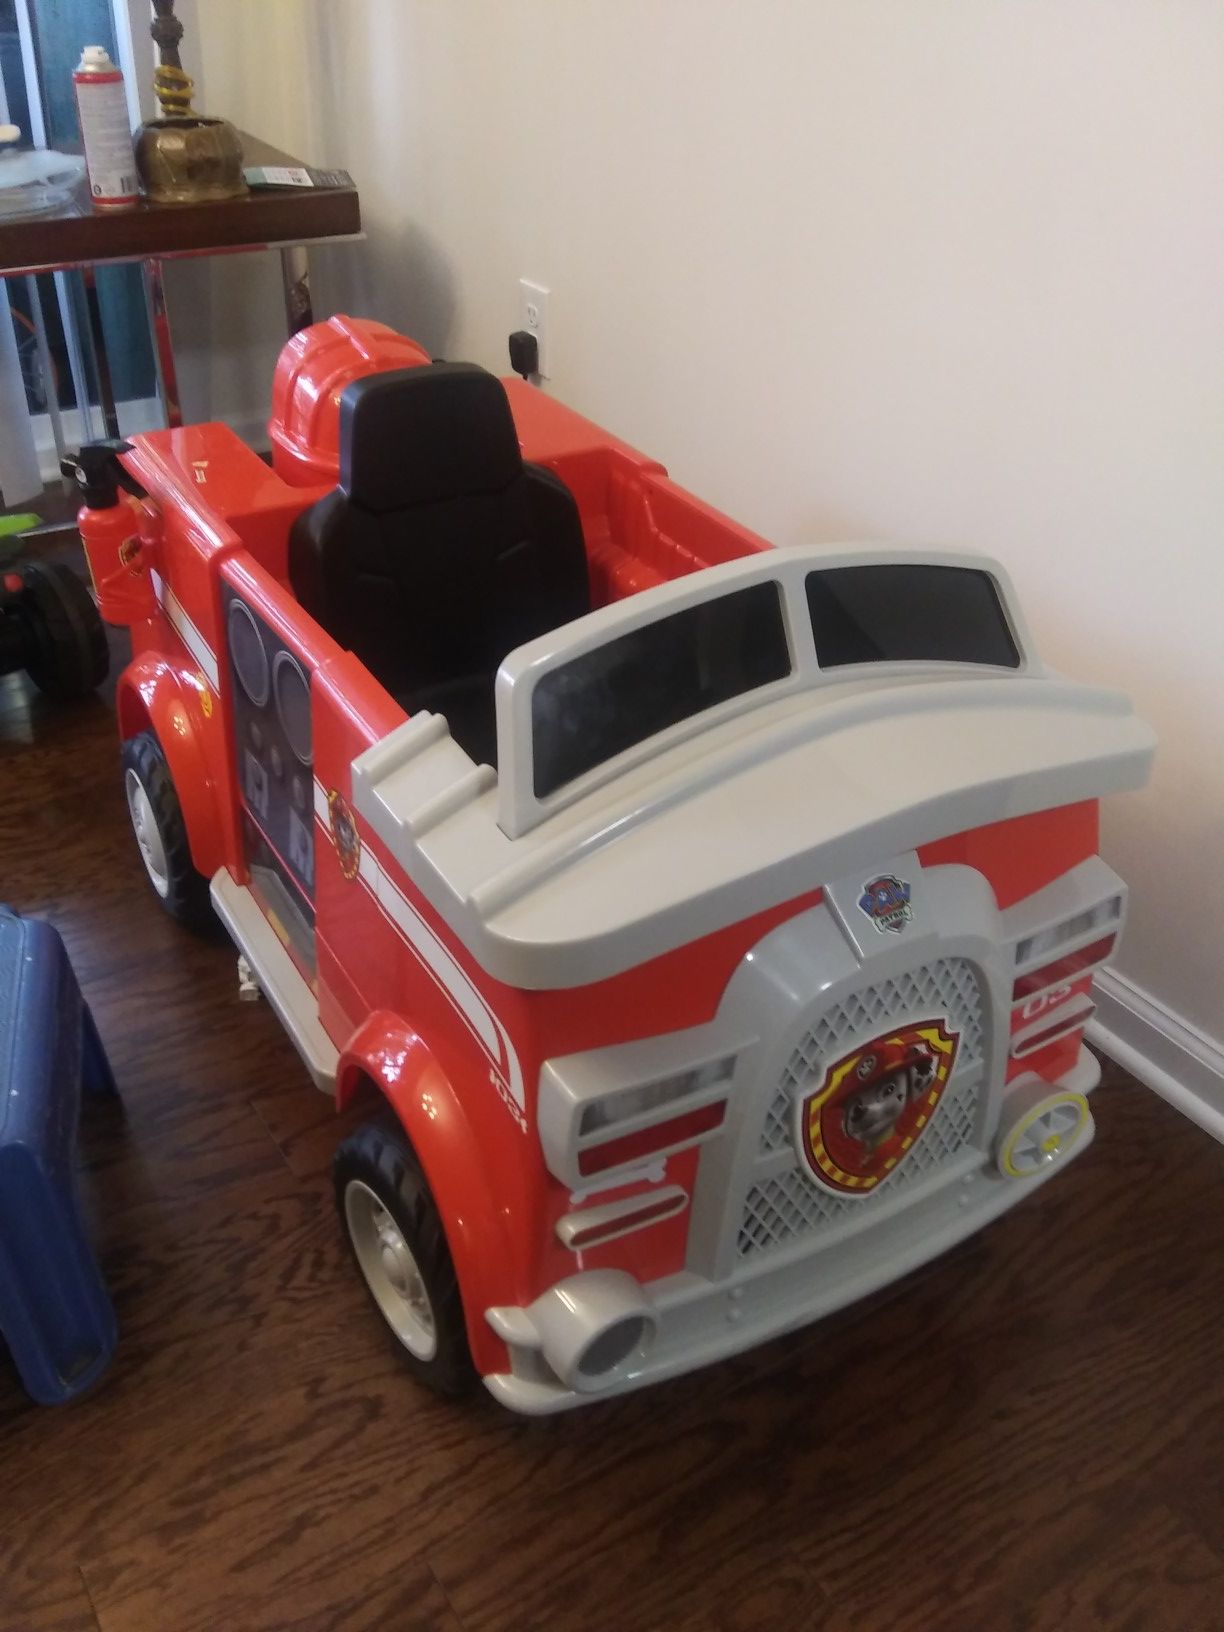 Paw patrol car one driver only